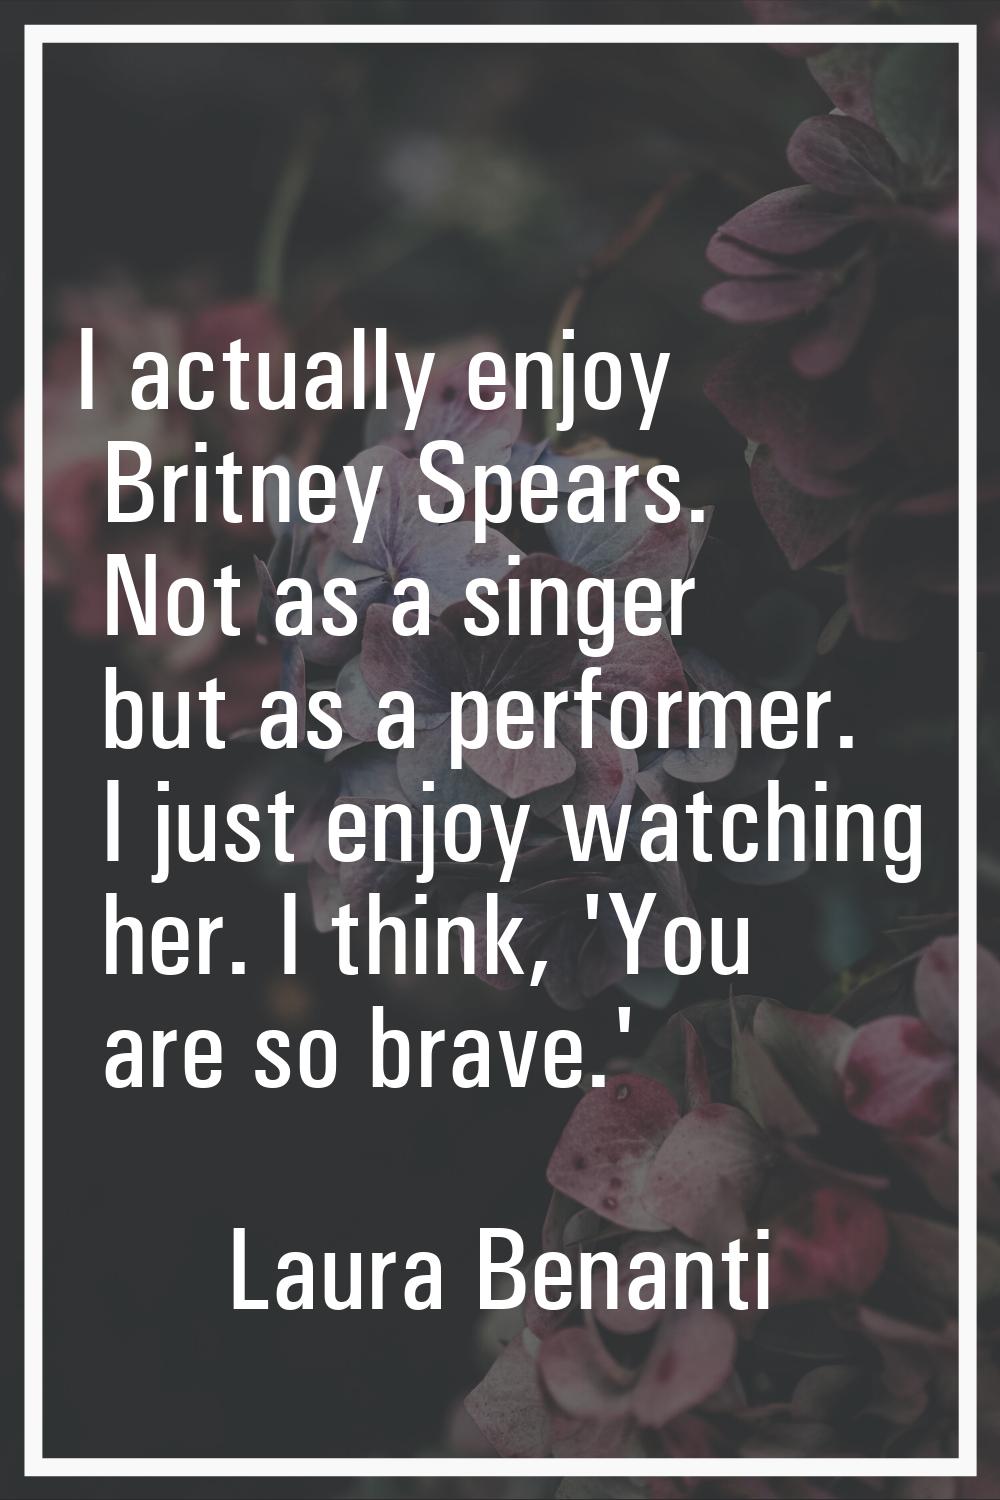 I actually enjoy Britney Spears. Not as a singer but as a performer. I just enjoy watching her. I t